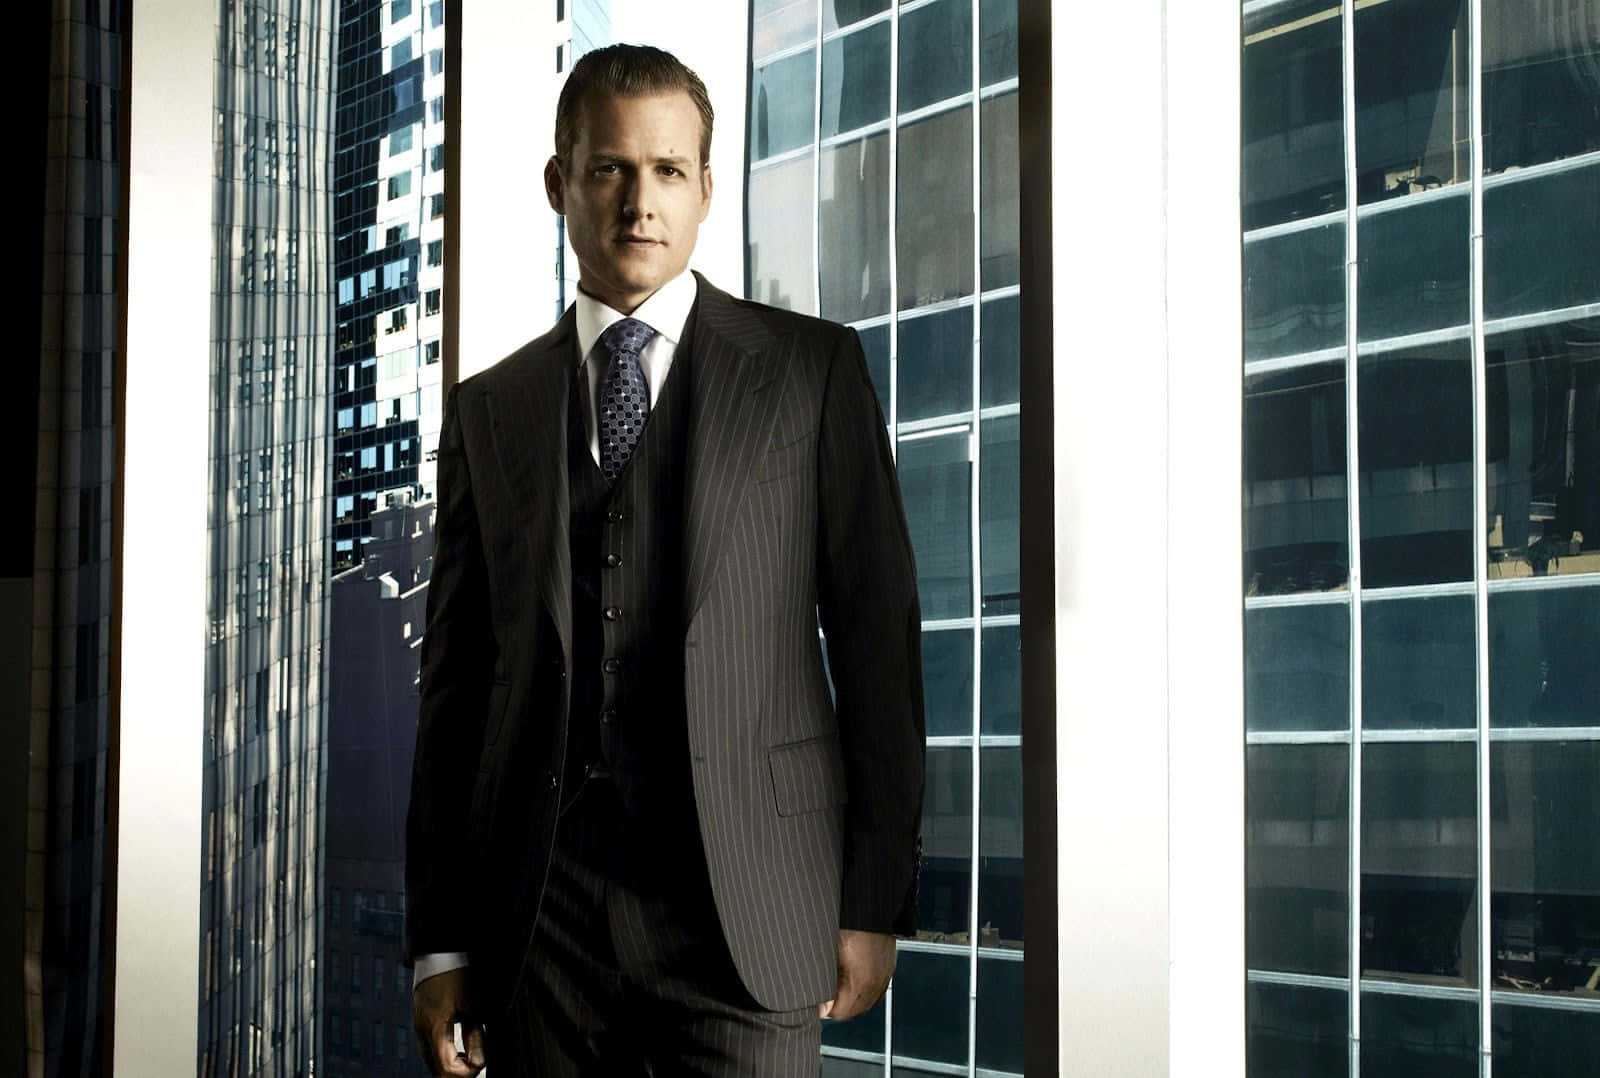 Sophisticated Business Professional in Striking Charcoal Suit